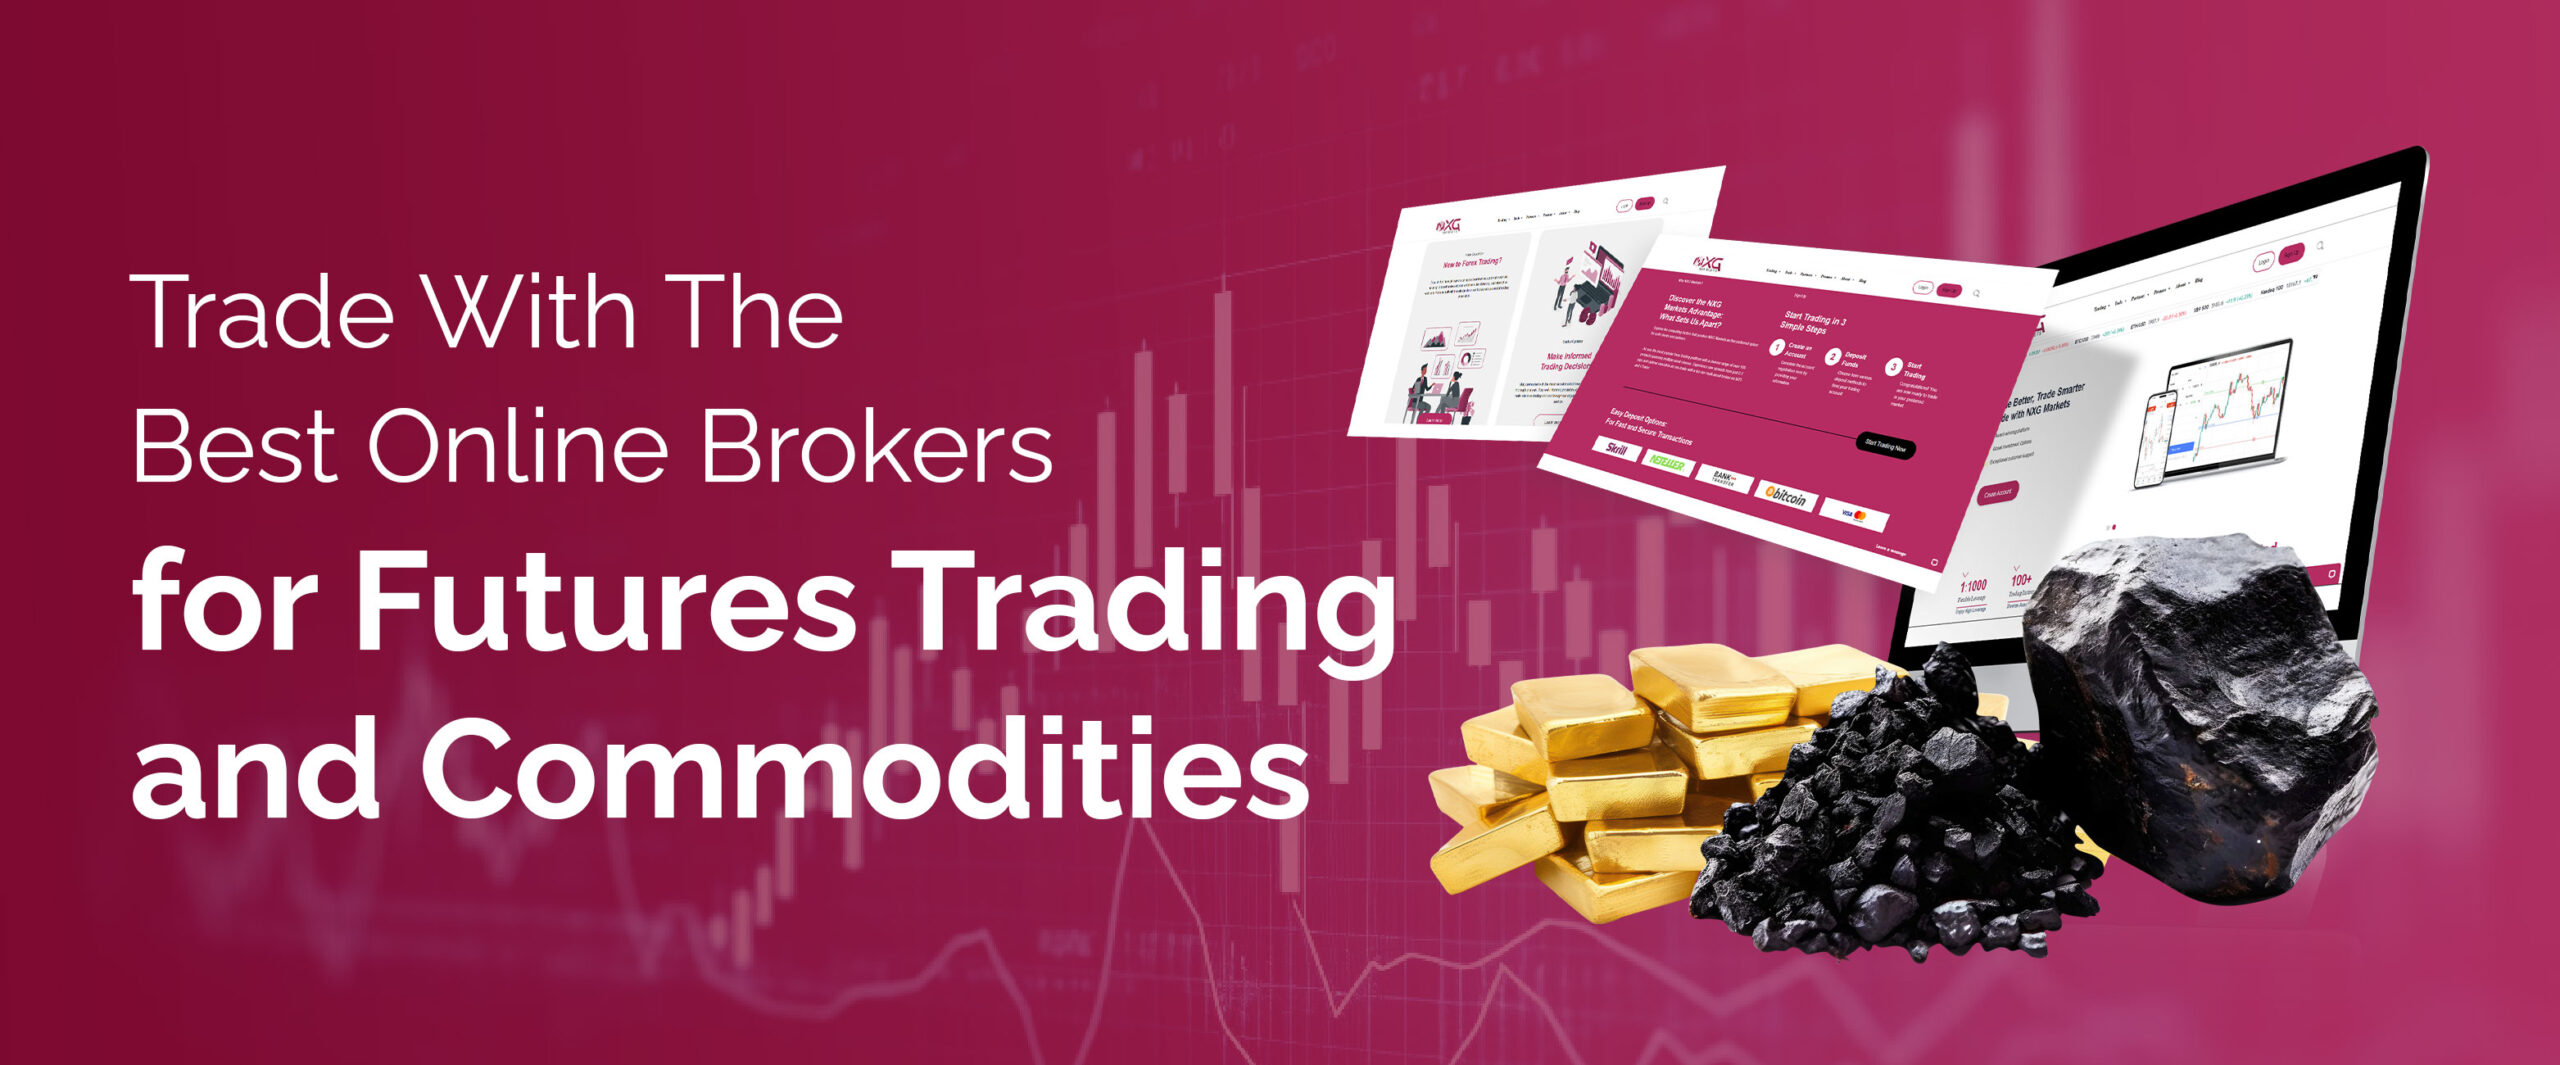 best online brokers for future Trading and Commodities